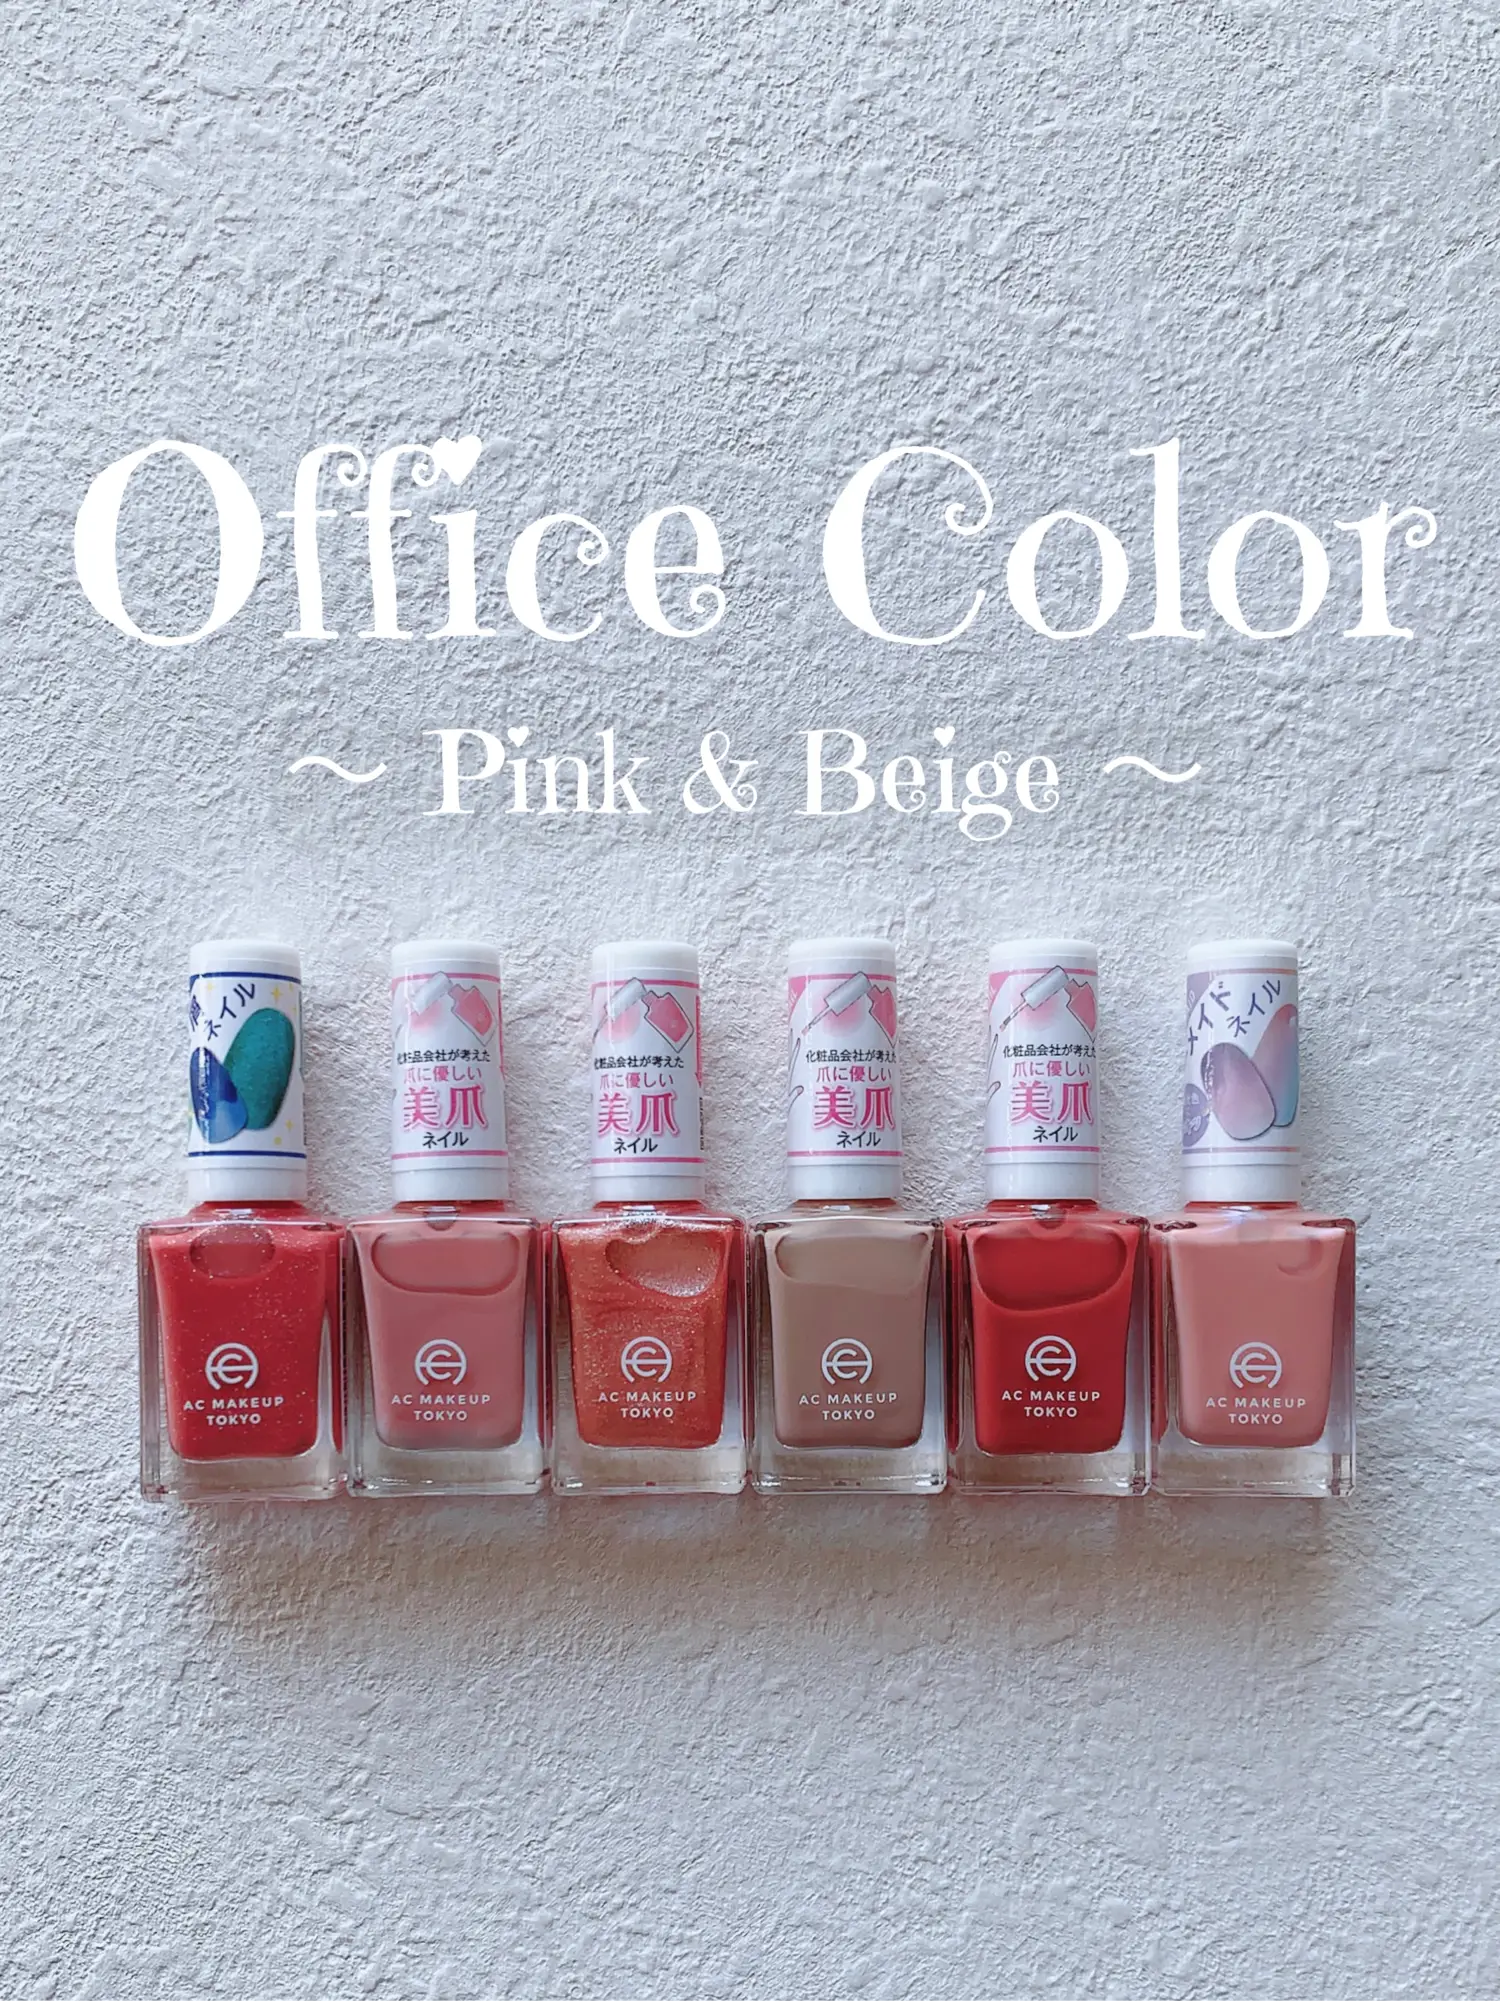 5 Pink & Beige Colors Recommended for Office Nails💕 | Gallery